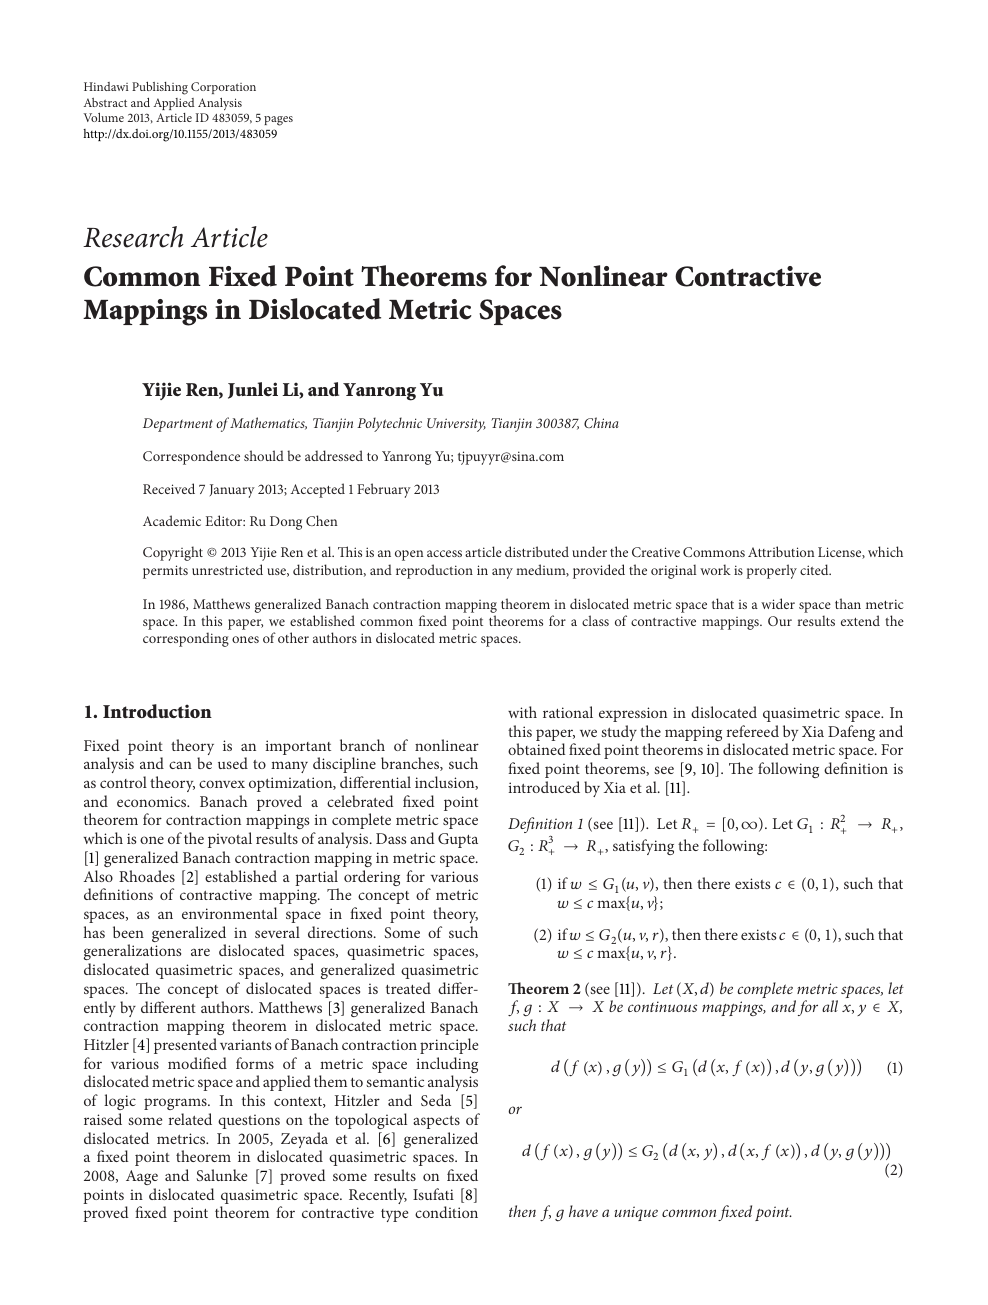 Common Fixed Point Theorems For Nonlinear Contractive Mappings In Dislocated Metric Spaces Topic Of Research Paper In Mathematics Download Scholarly Article Pdf And Read For Free On Cyberleninka Open Science Hub